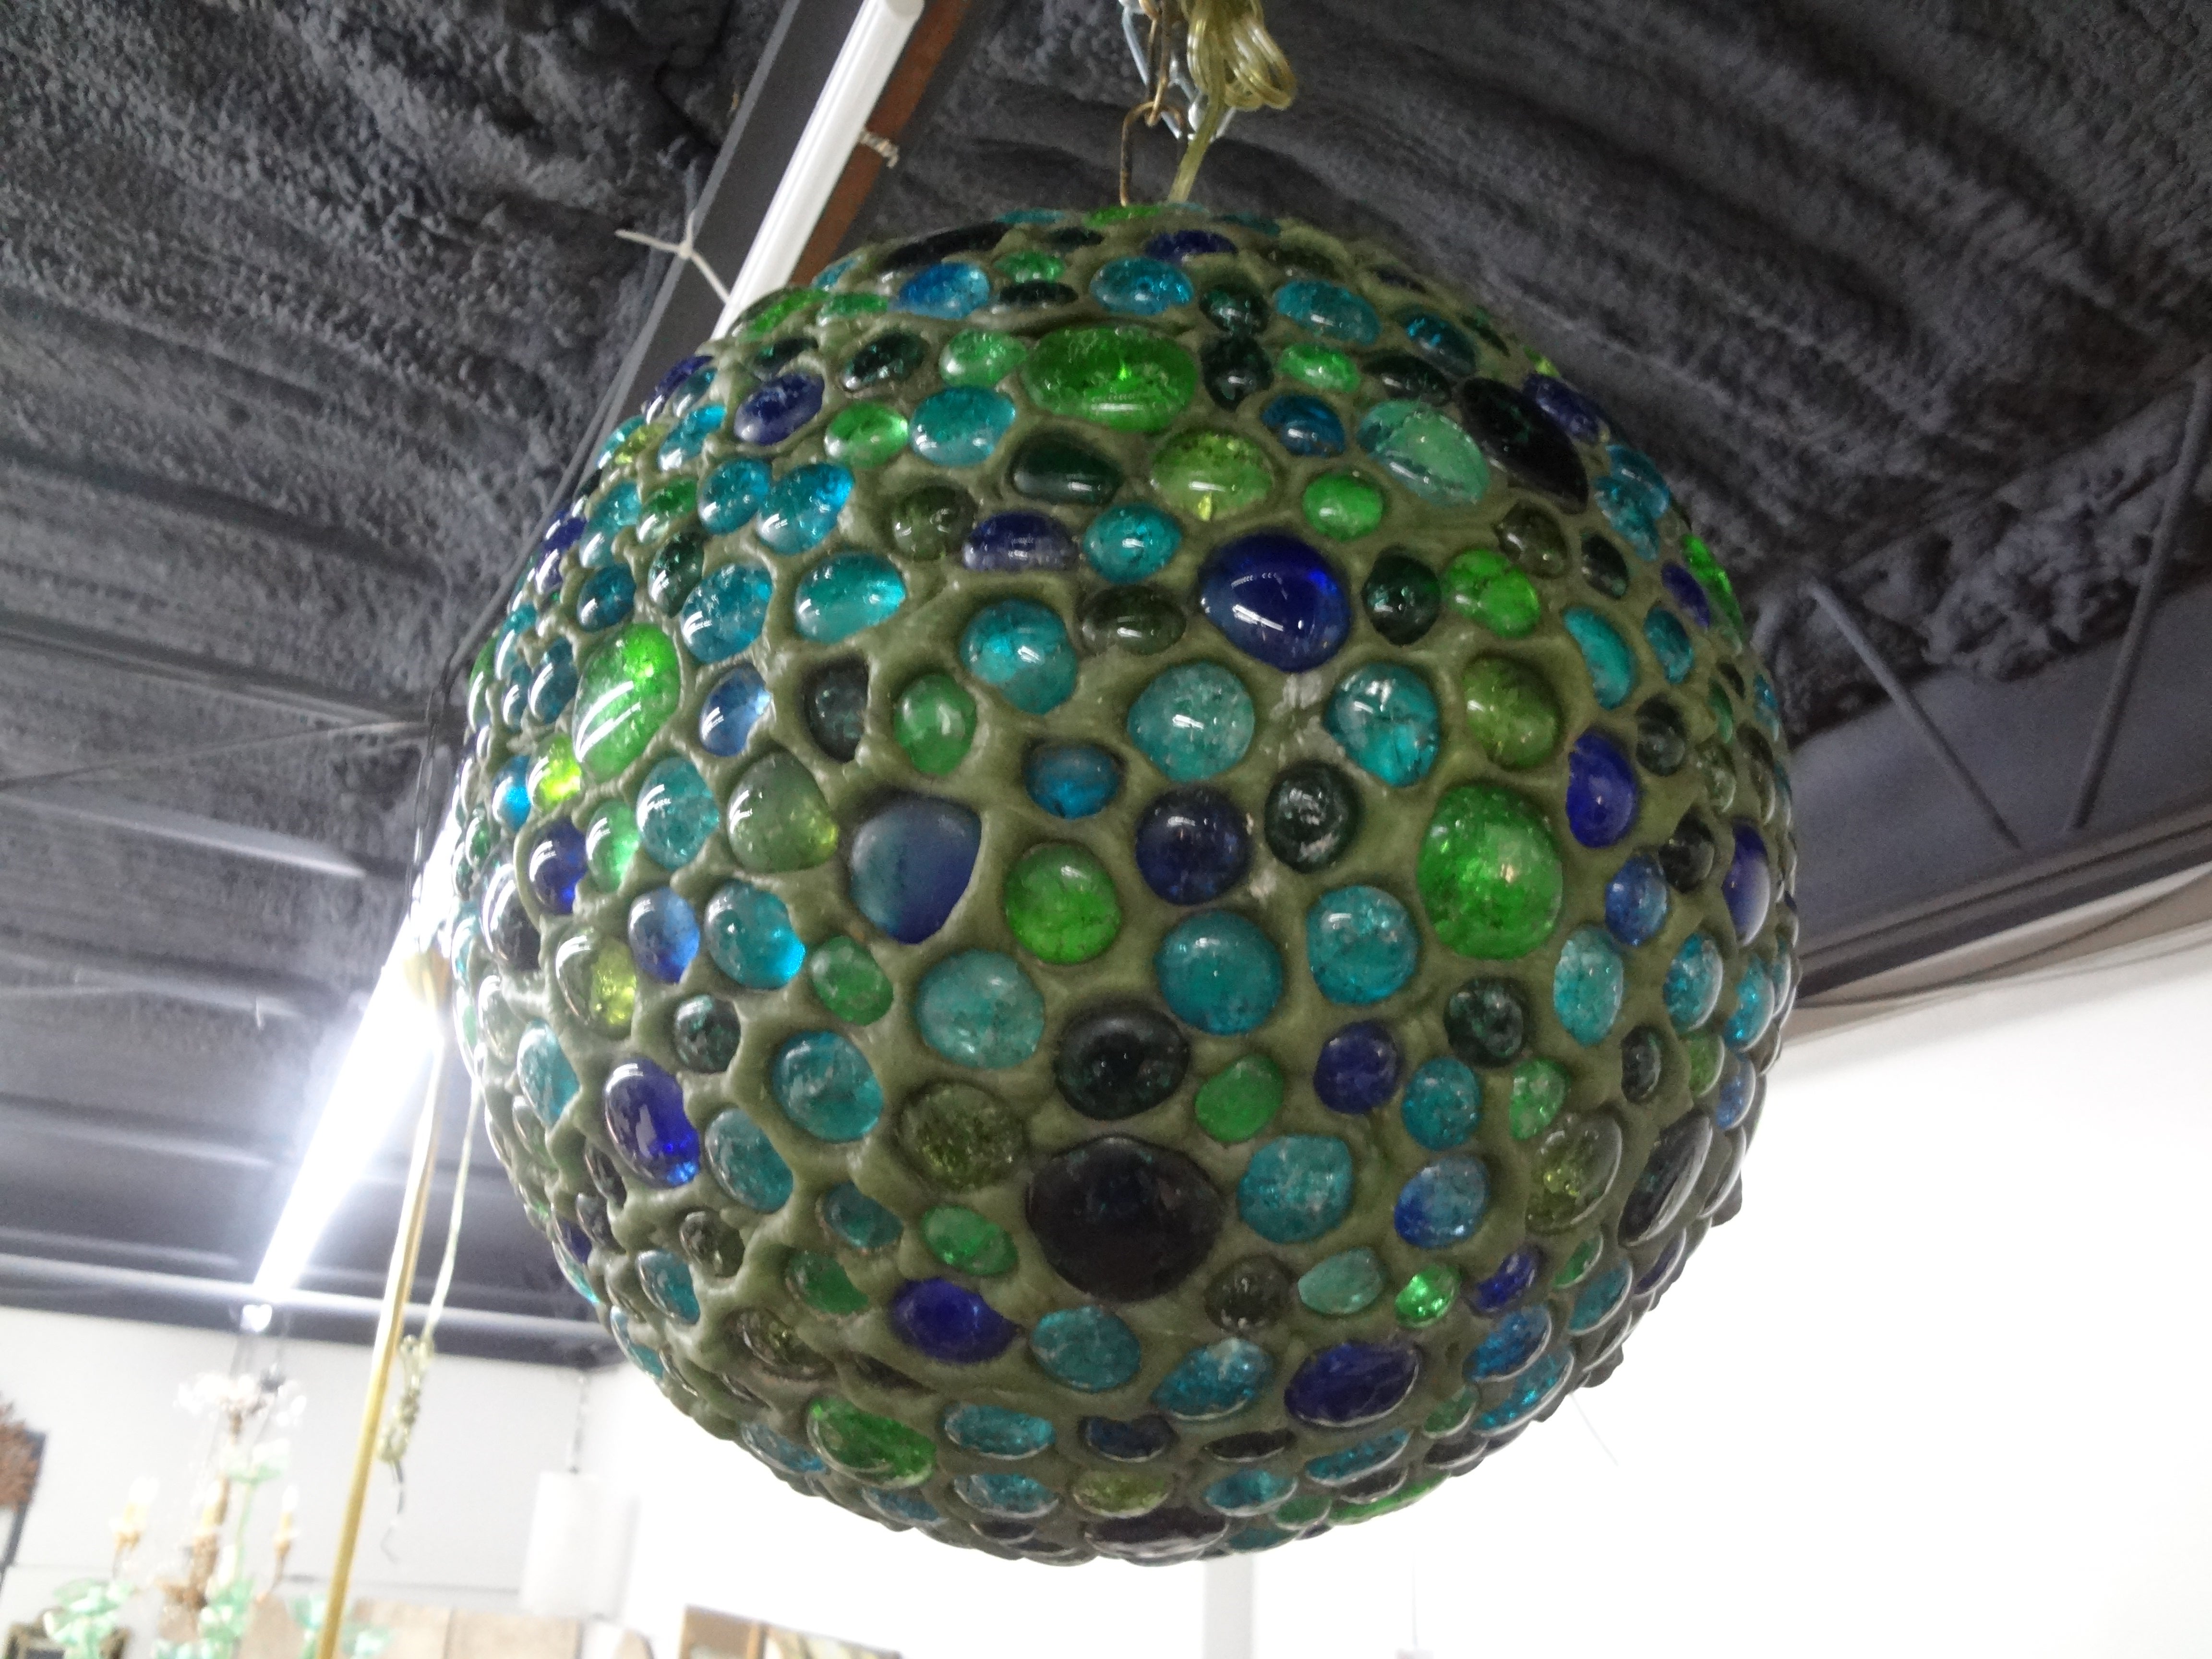 Italian Modern Multicolored Glass Lantern. Stunning Italian multicolored glass sphere lantern of green, blue and turquoise applied glass. Newly wired for the U.S. market with a new single Edison socket. Dimensions given are for the globe only and 